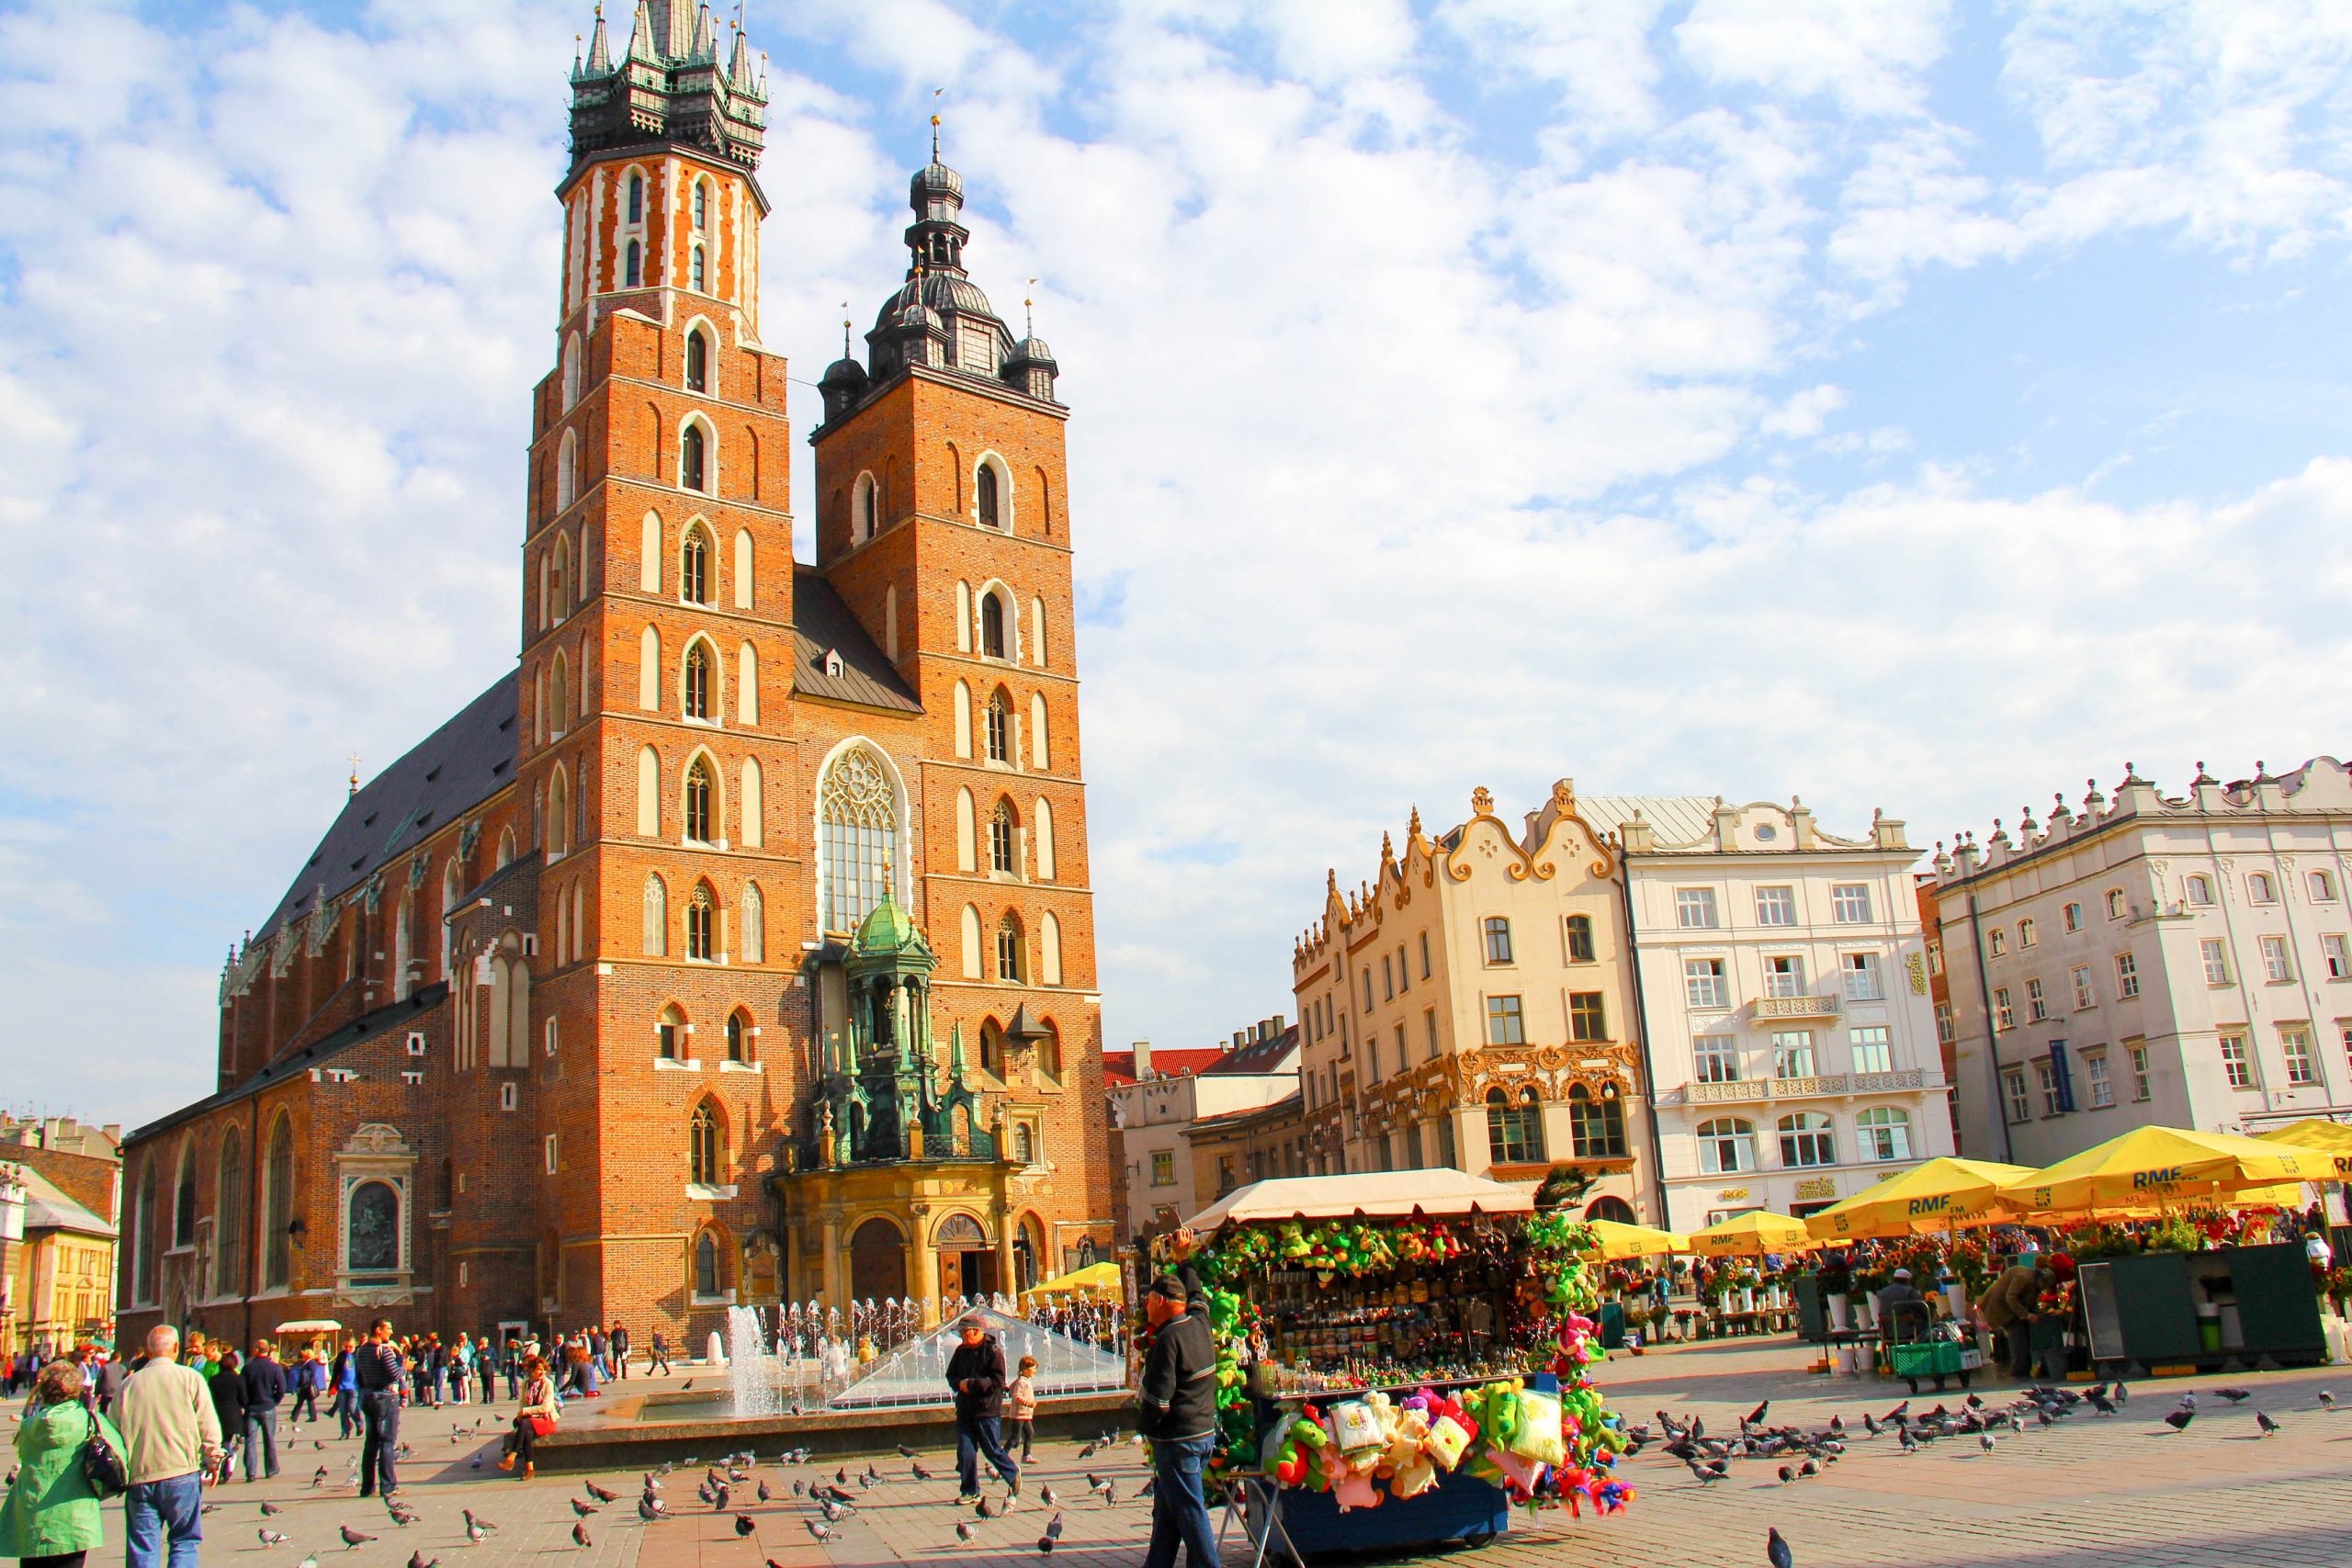 Canva-Krakow-Old-Town-Market-Square-Church-Poland-Europe-scaled.jpg